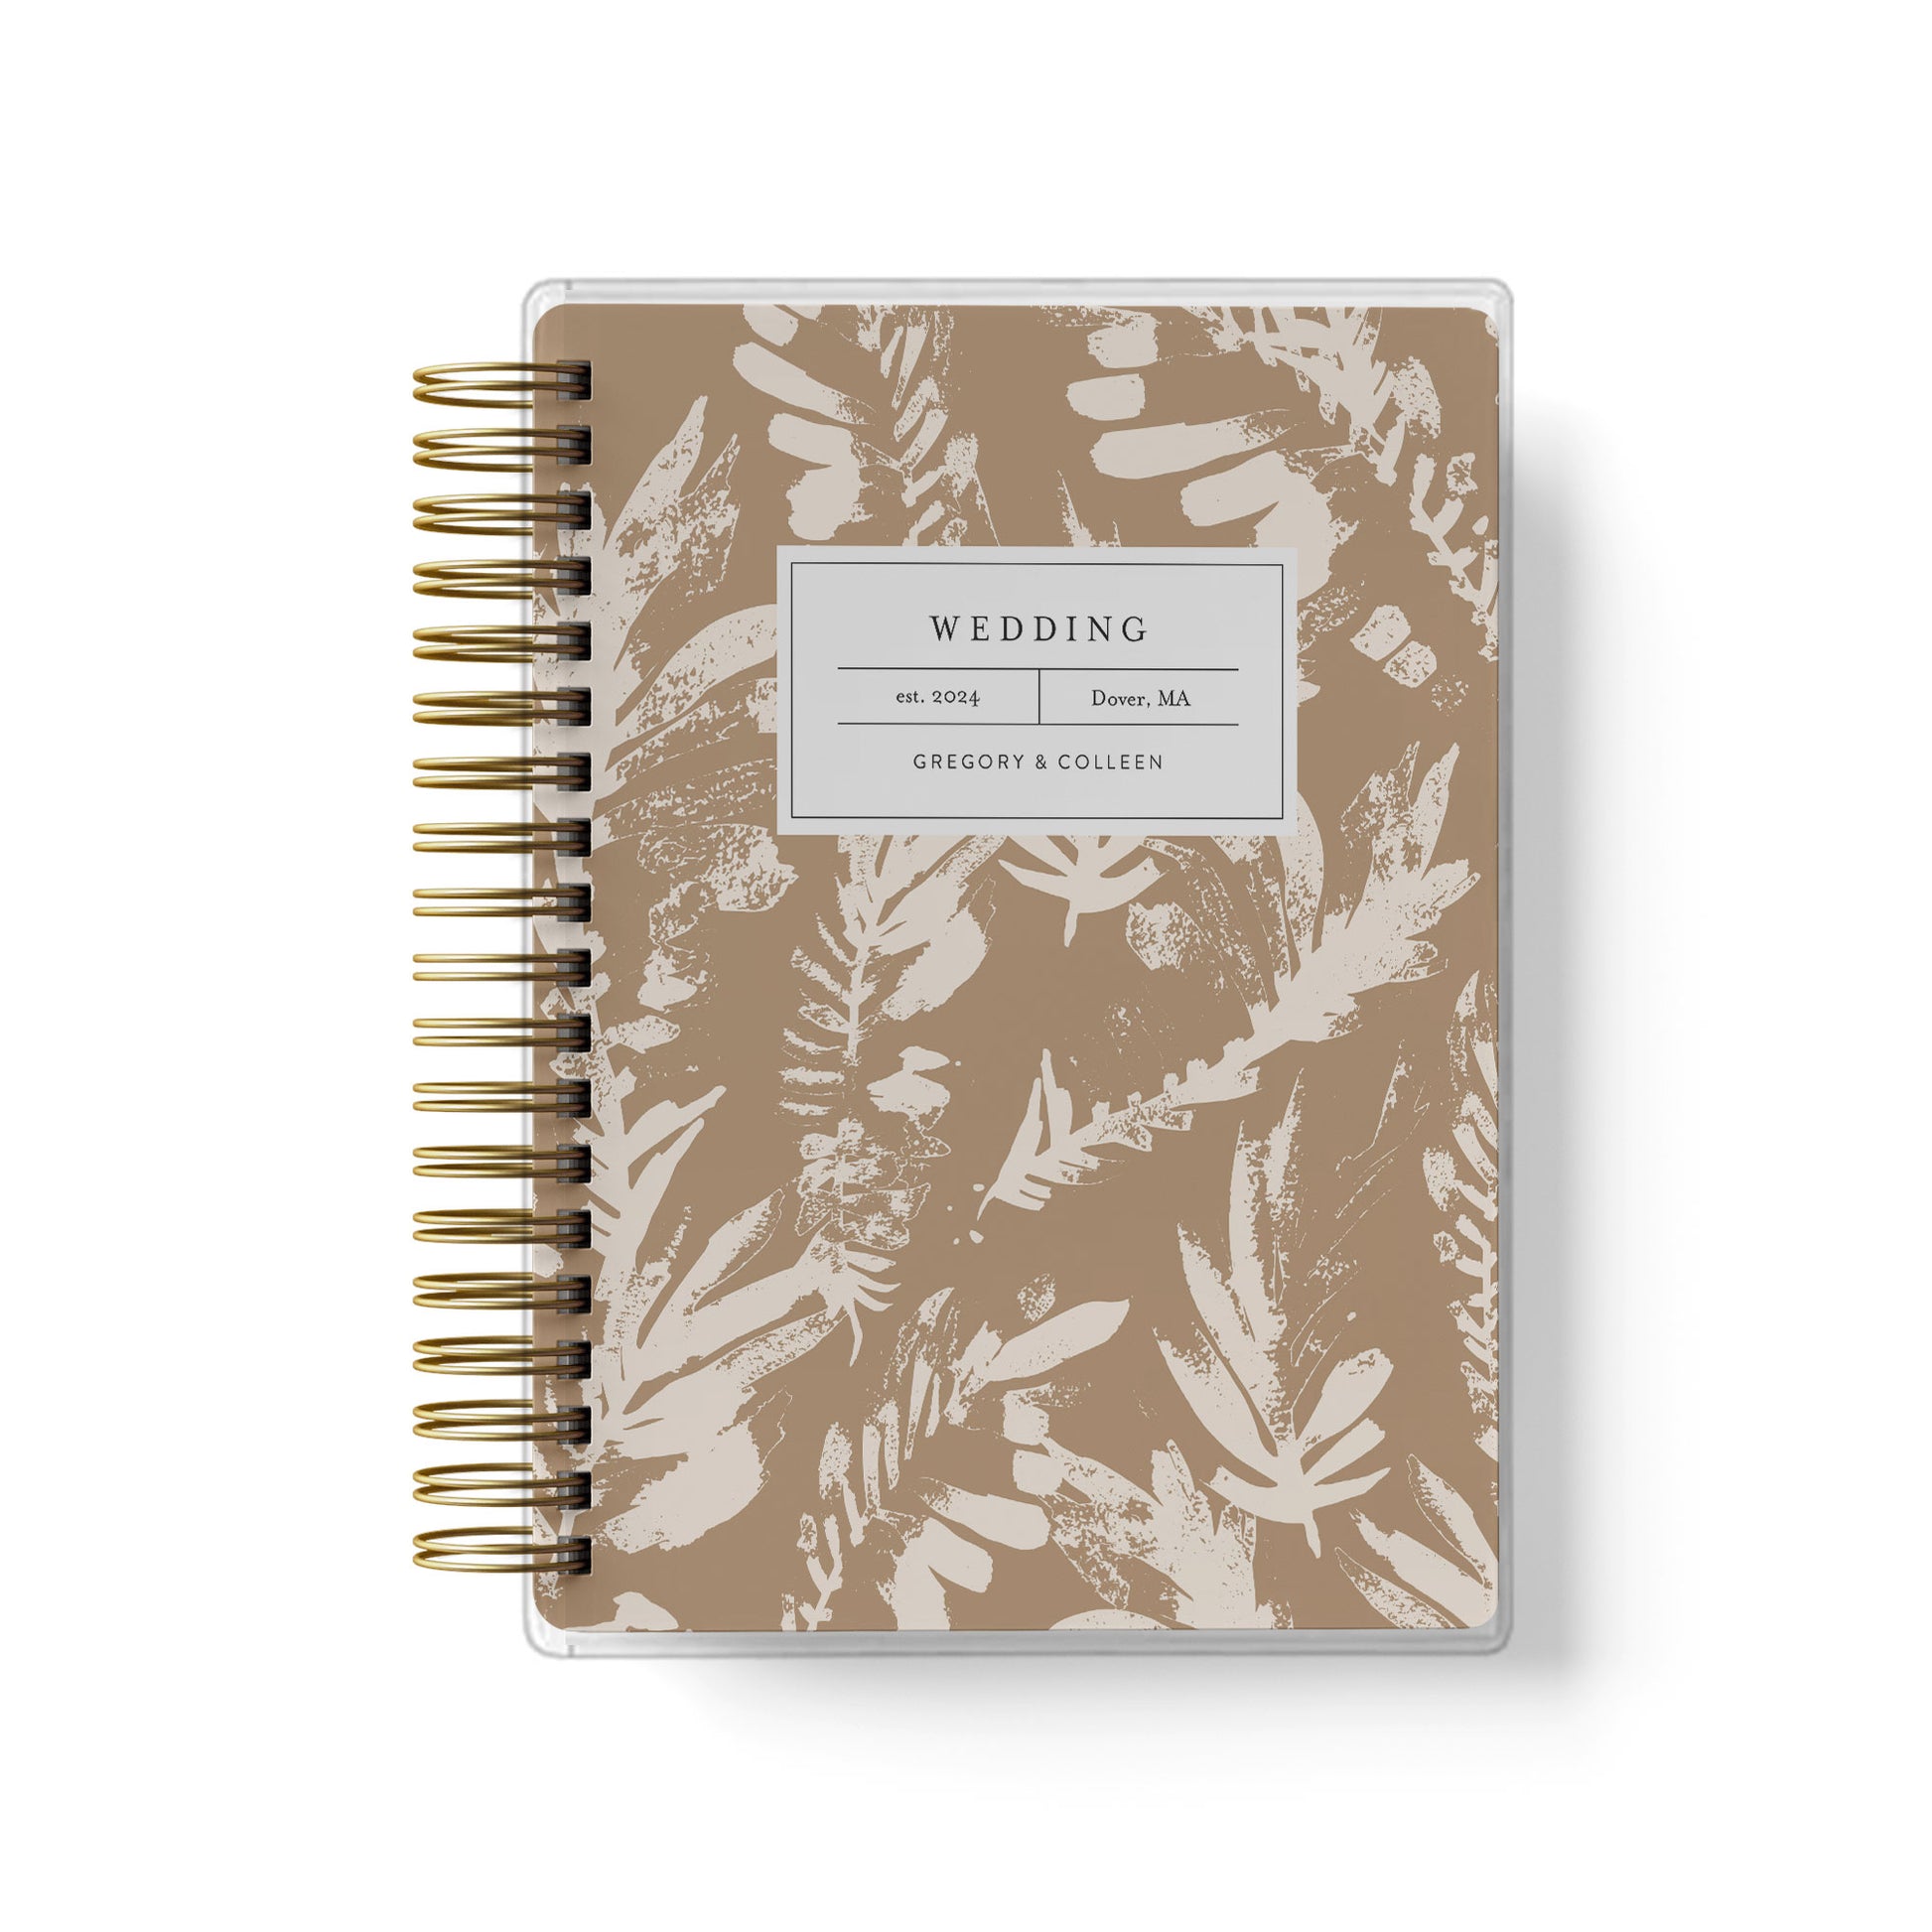 Our neutral boho leaf design is the best option for budget friendly wedding planner books